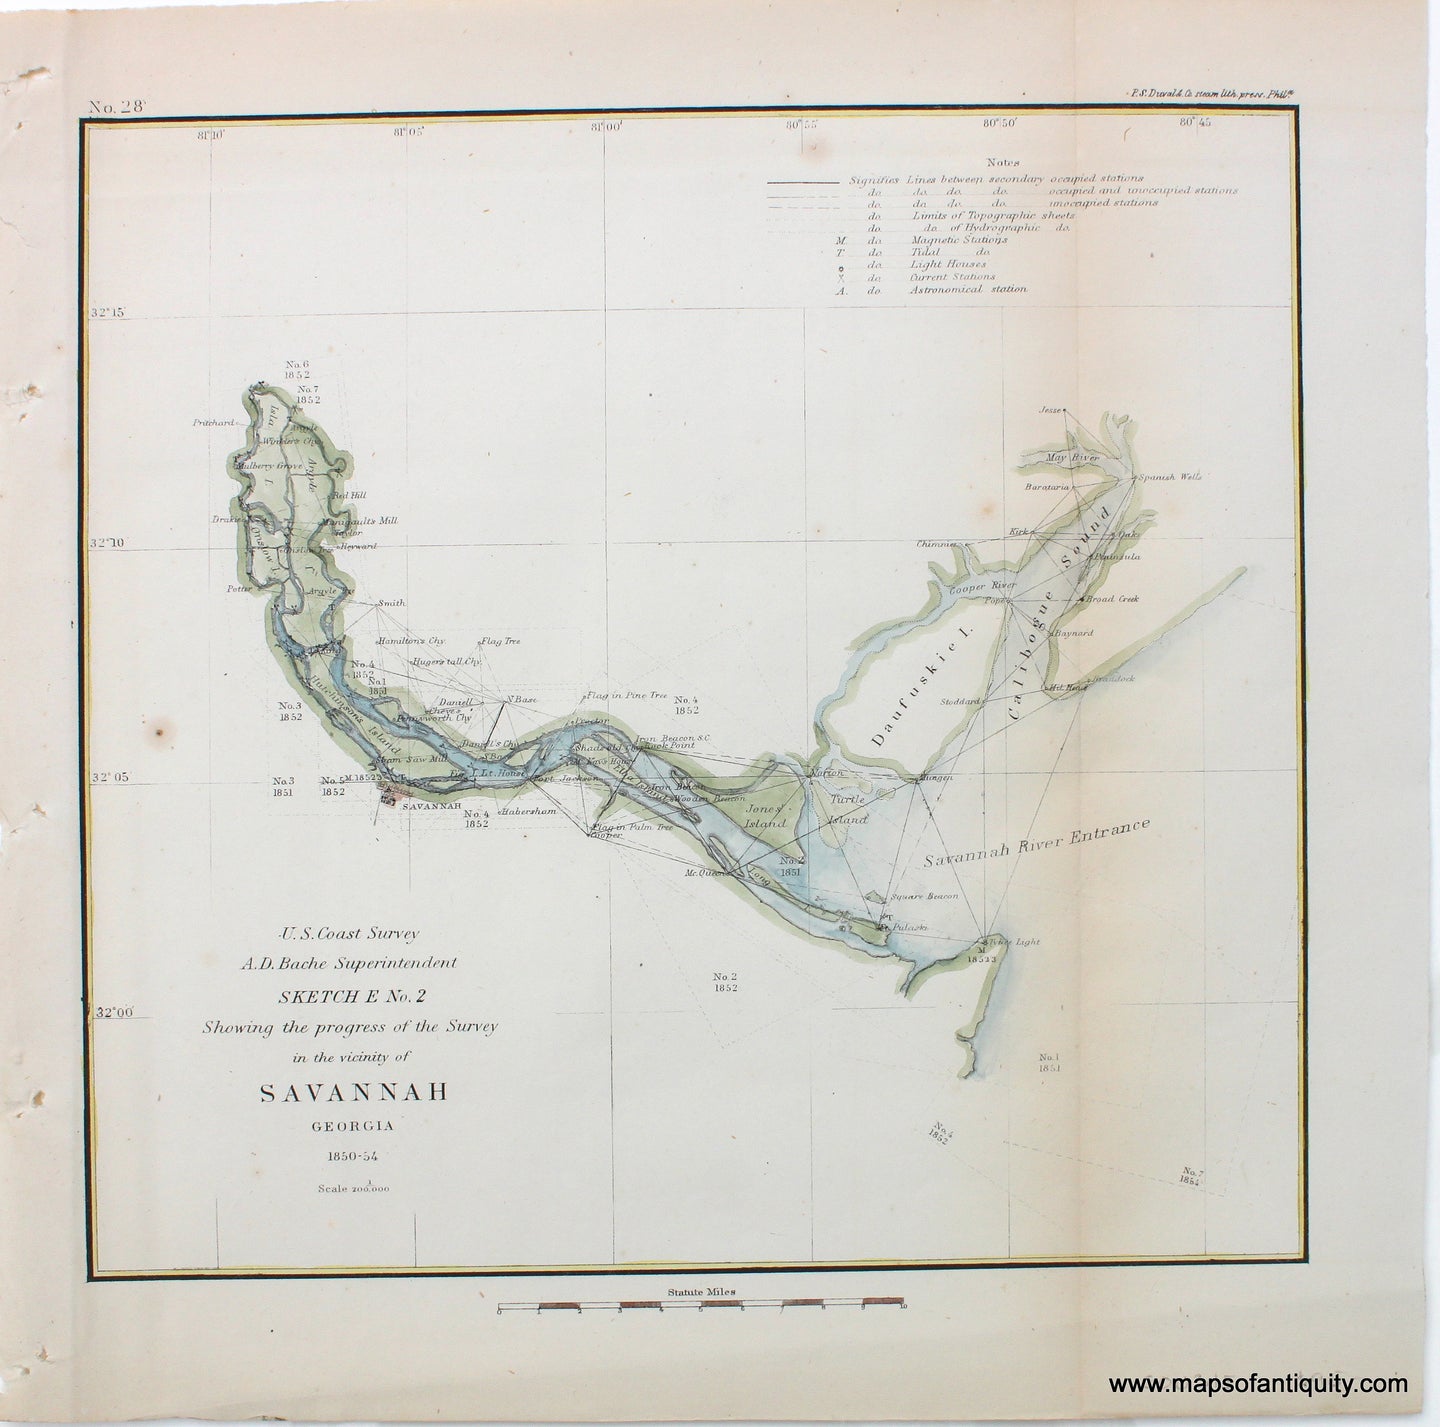 1854 - Sketch E No. 2 Showing the progress of the Survey in the vicinity of Savannah, Georgia 1850-54 - Antique Chart